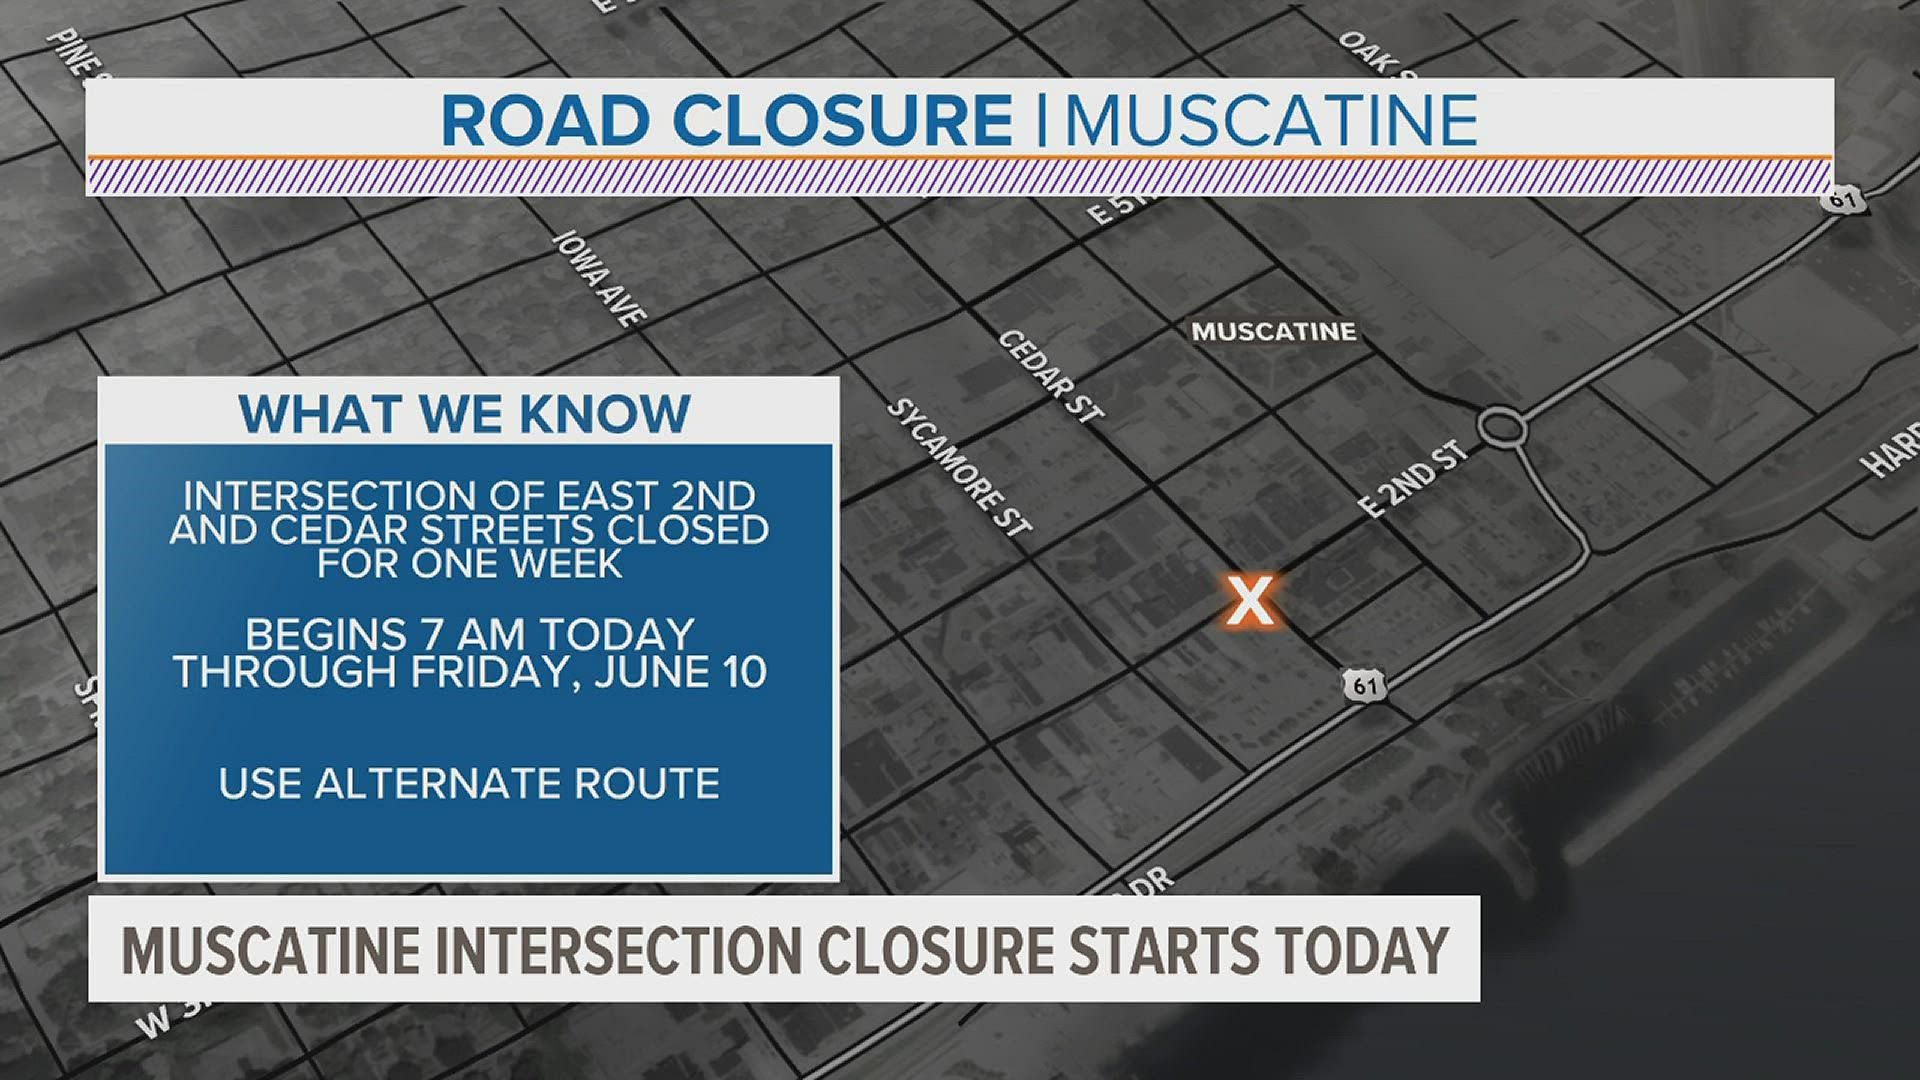 The closure at the intersection of East 2nd and Cedar streets begins Monday, June 6 and is expected to last through Friday, June 10.